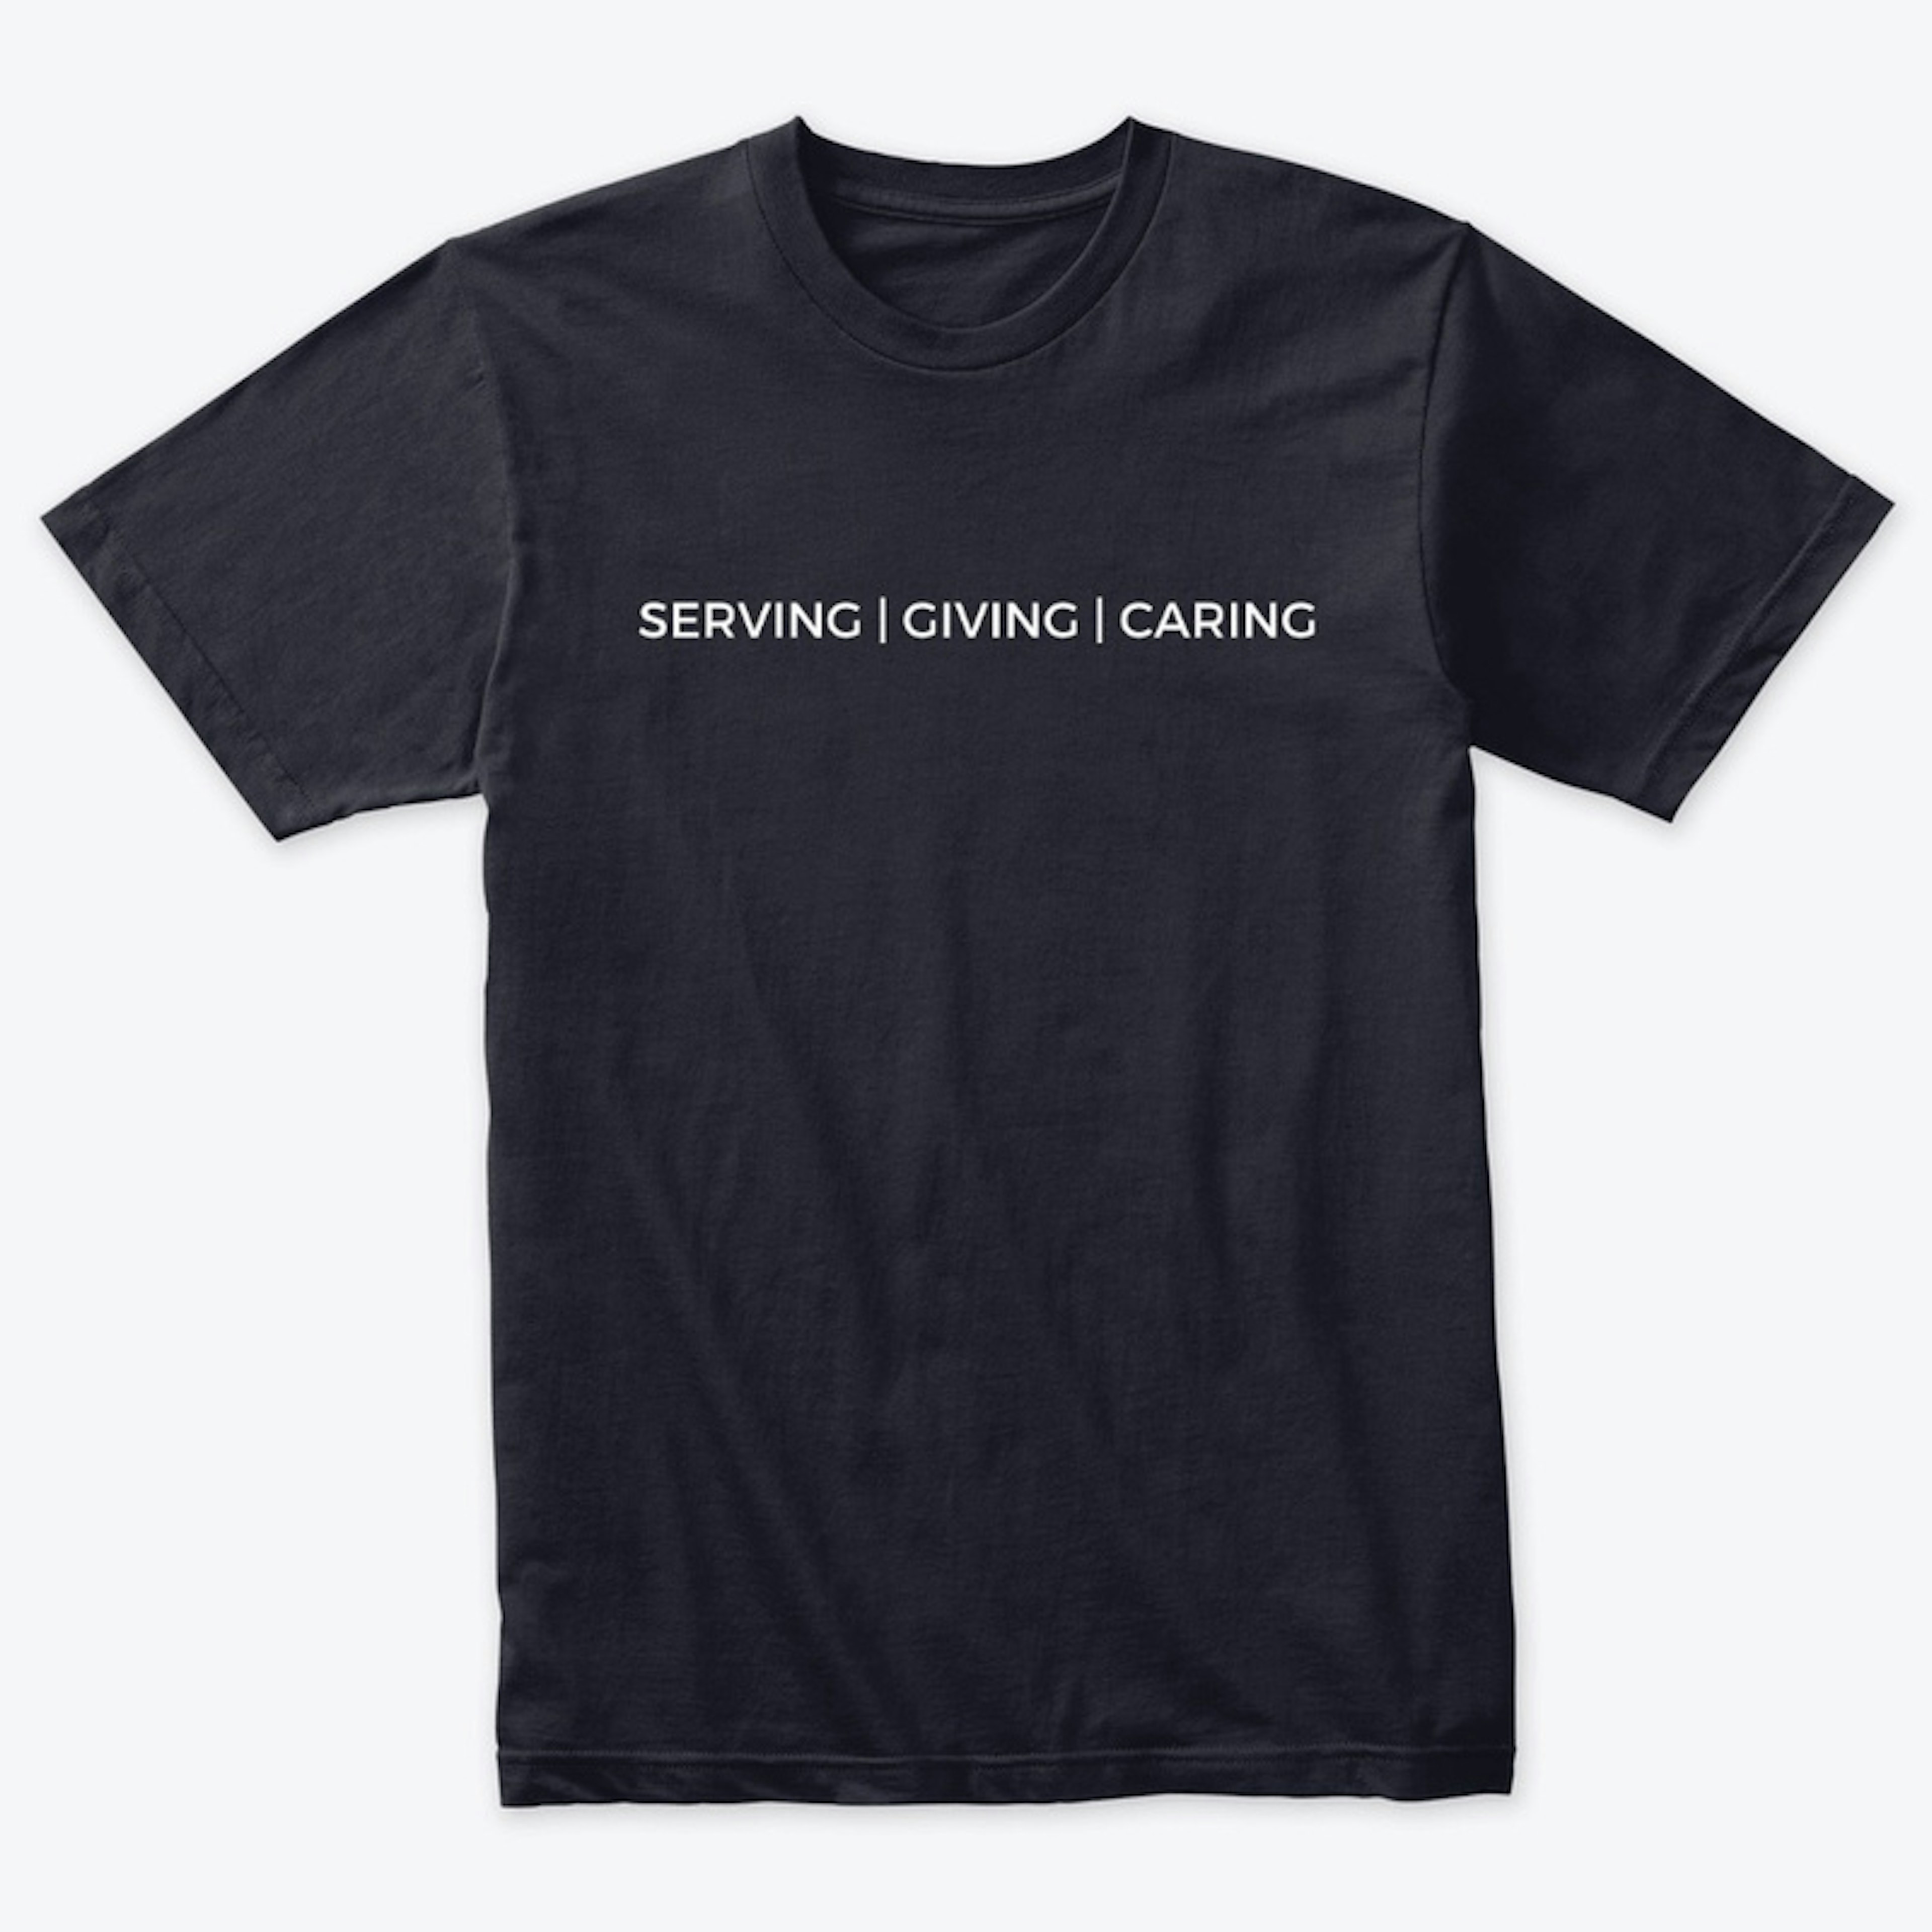 Serving | Giving | Caring